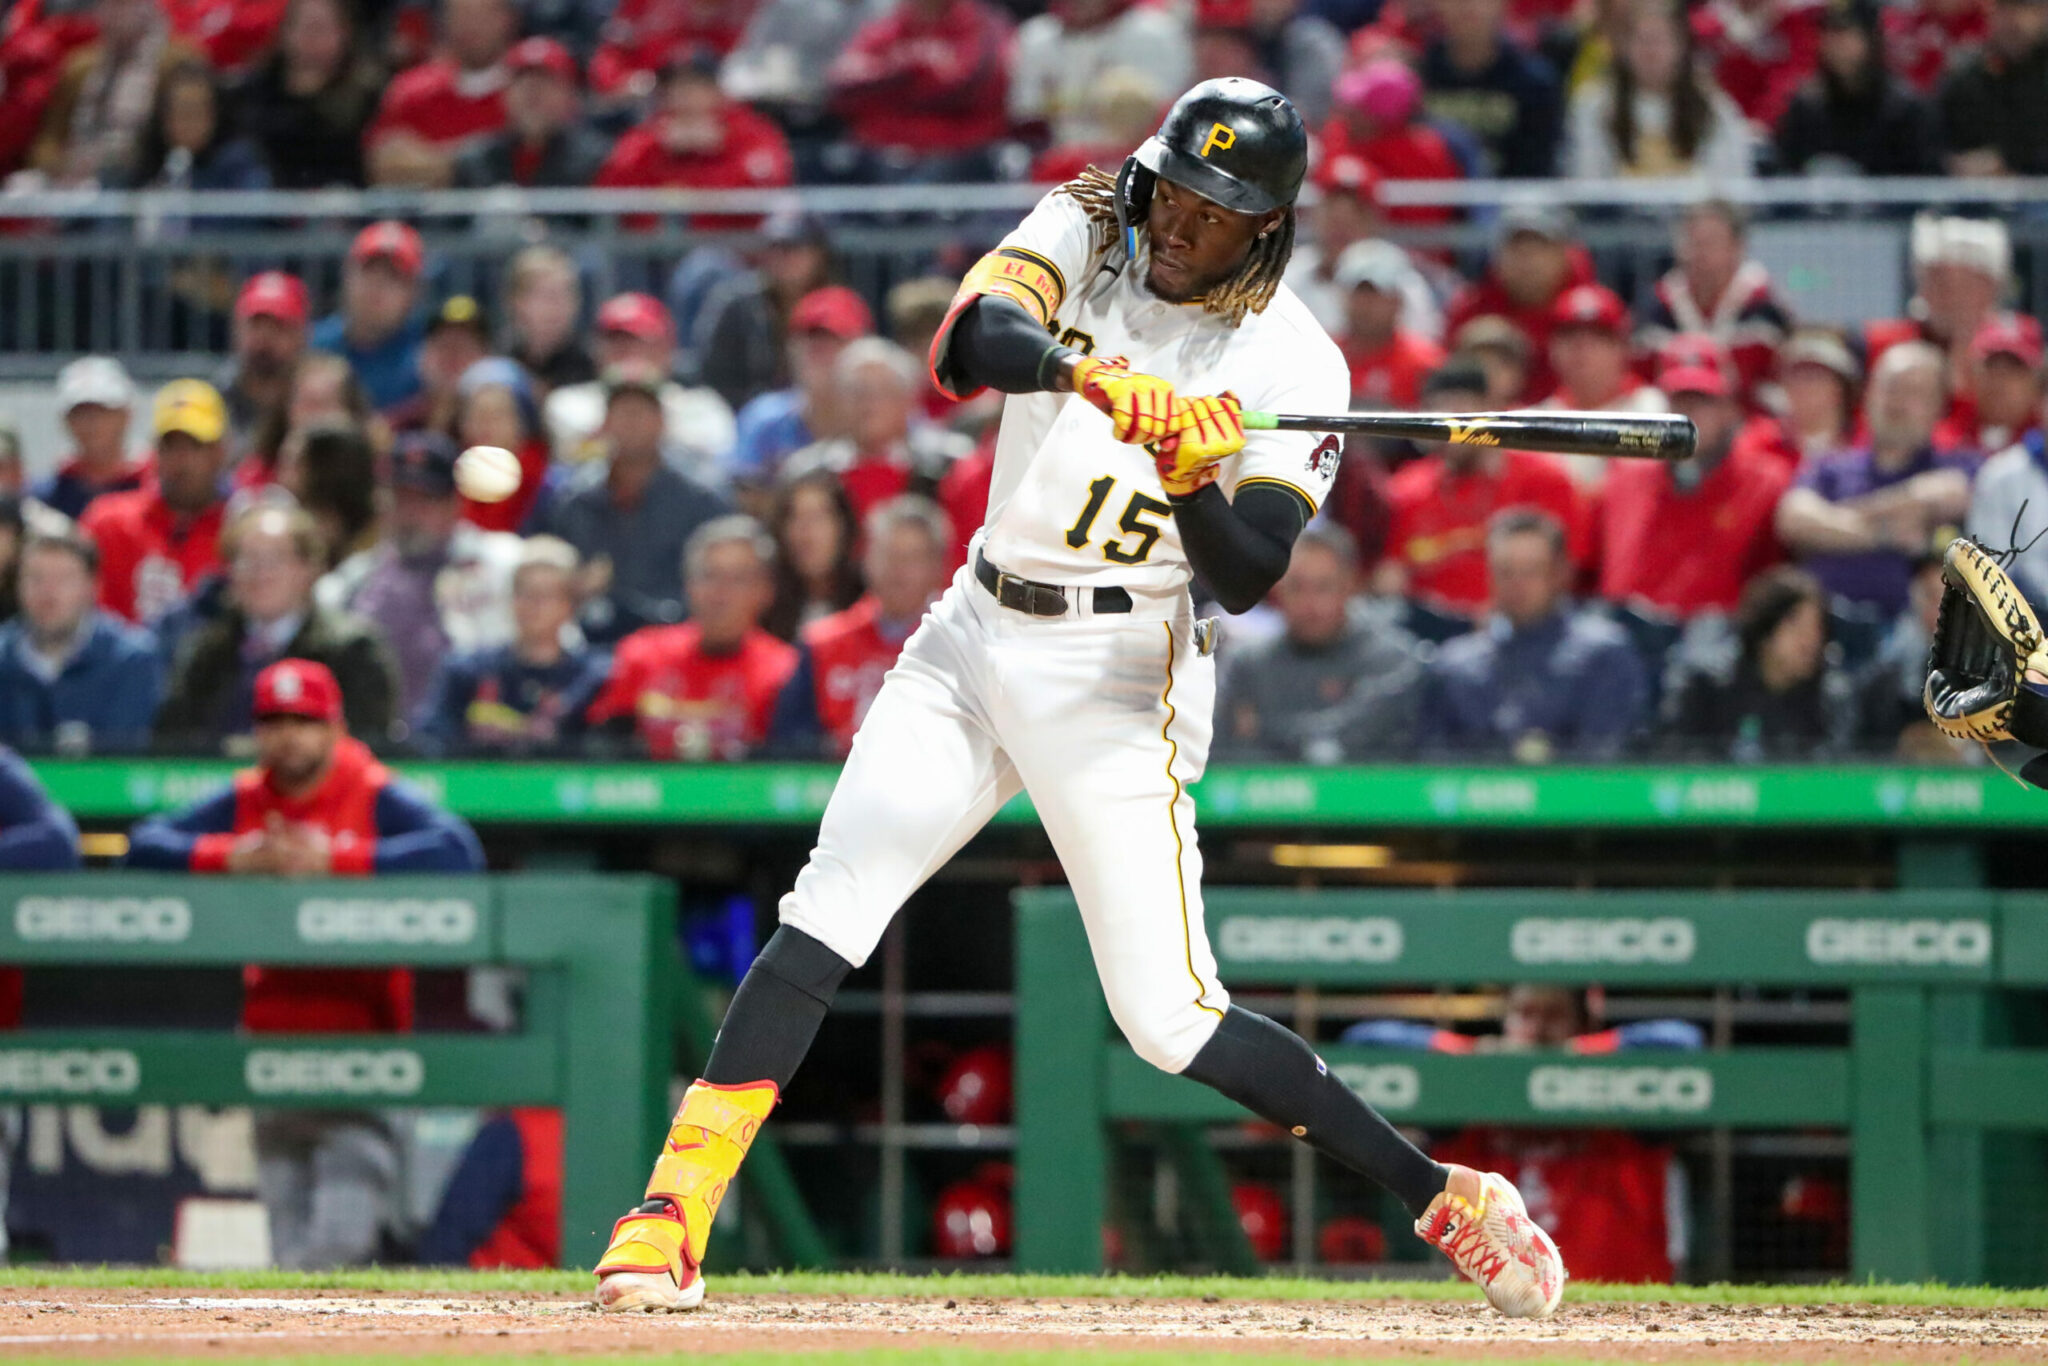 Pirates Prospects Daily: New Additions Should Help With Aggressive Approach At Plate